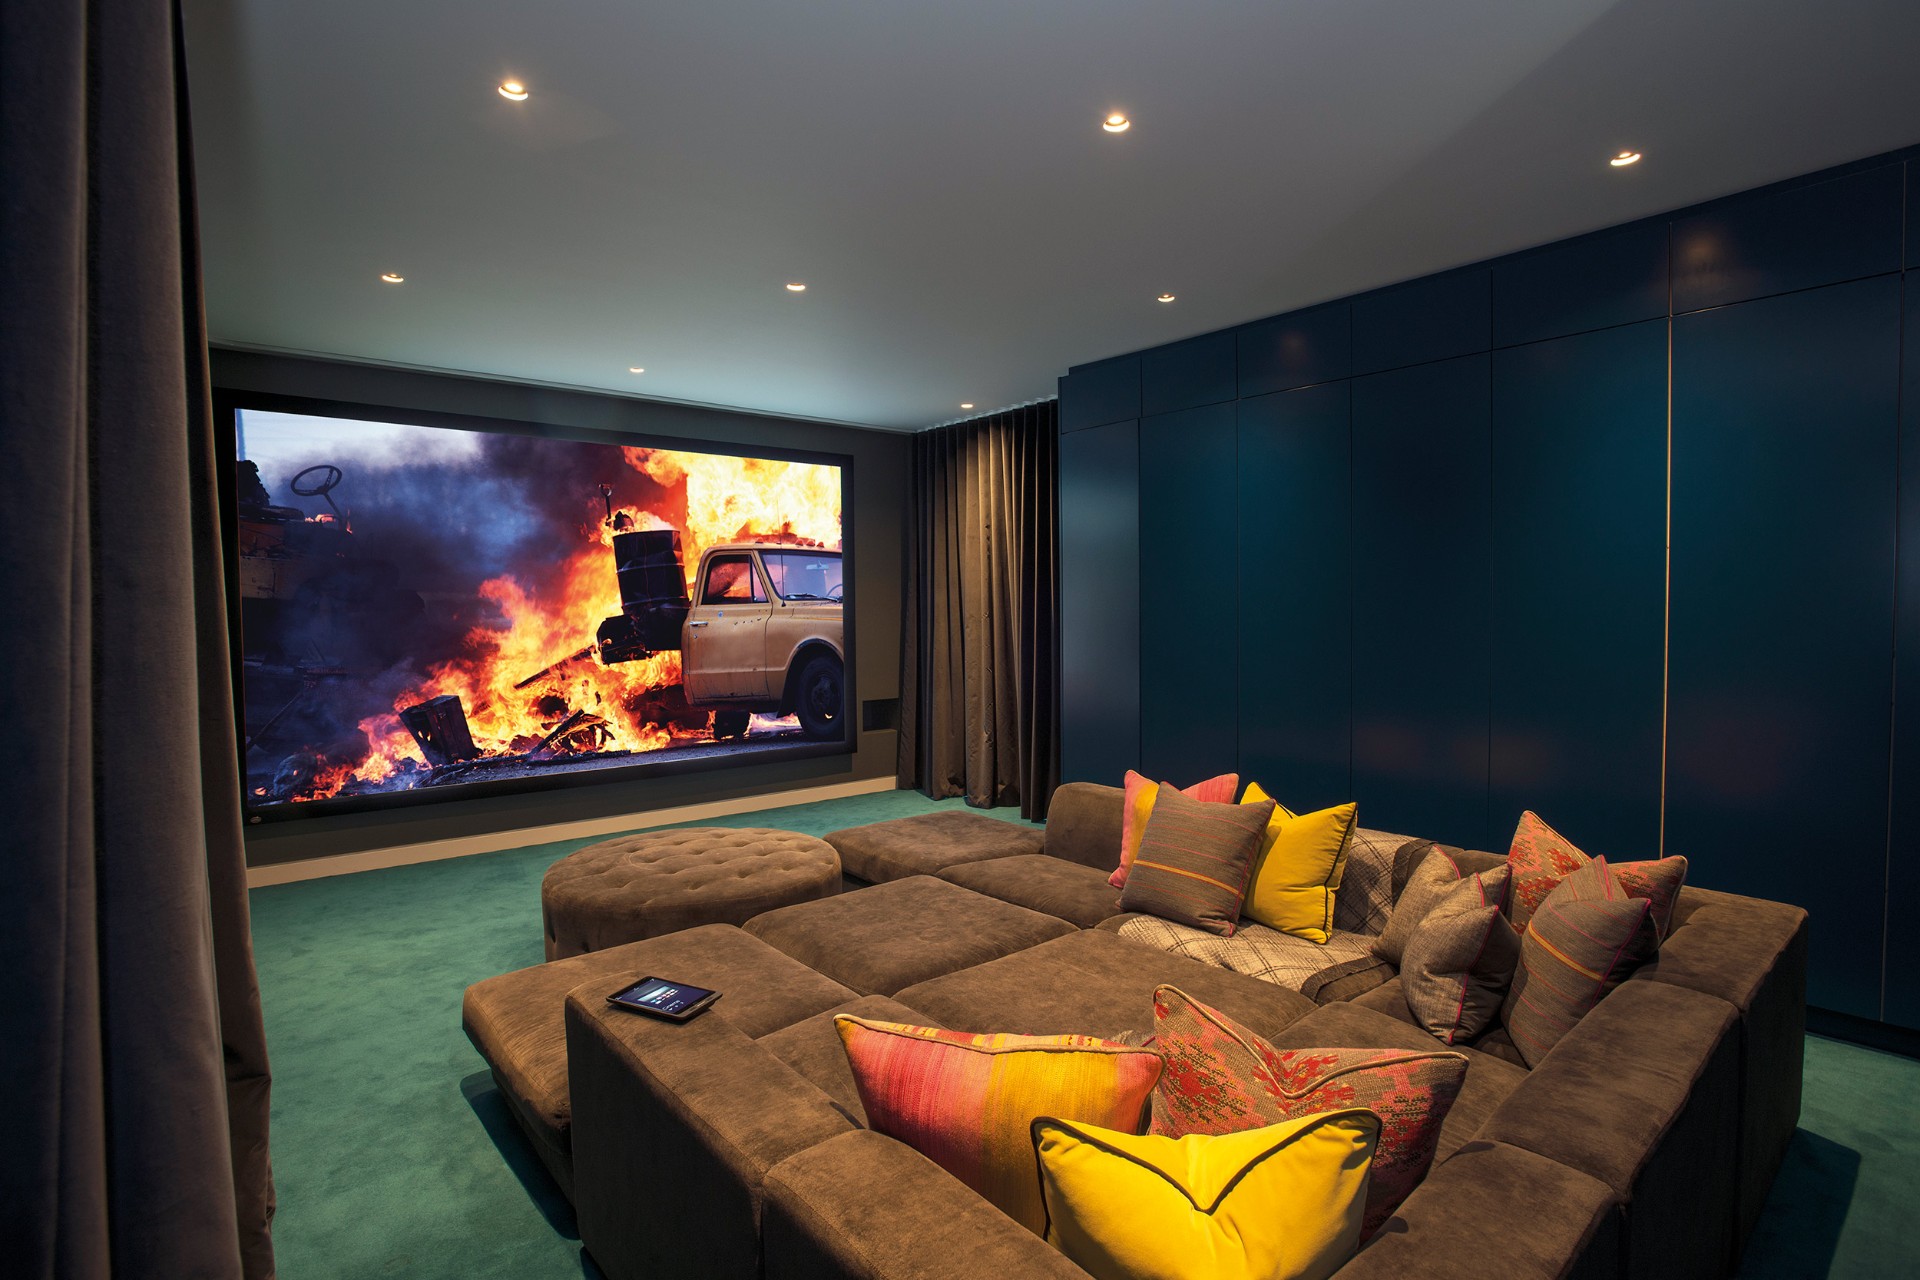 Cyberhomes discusses the key features and benefits in home automation Image